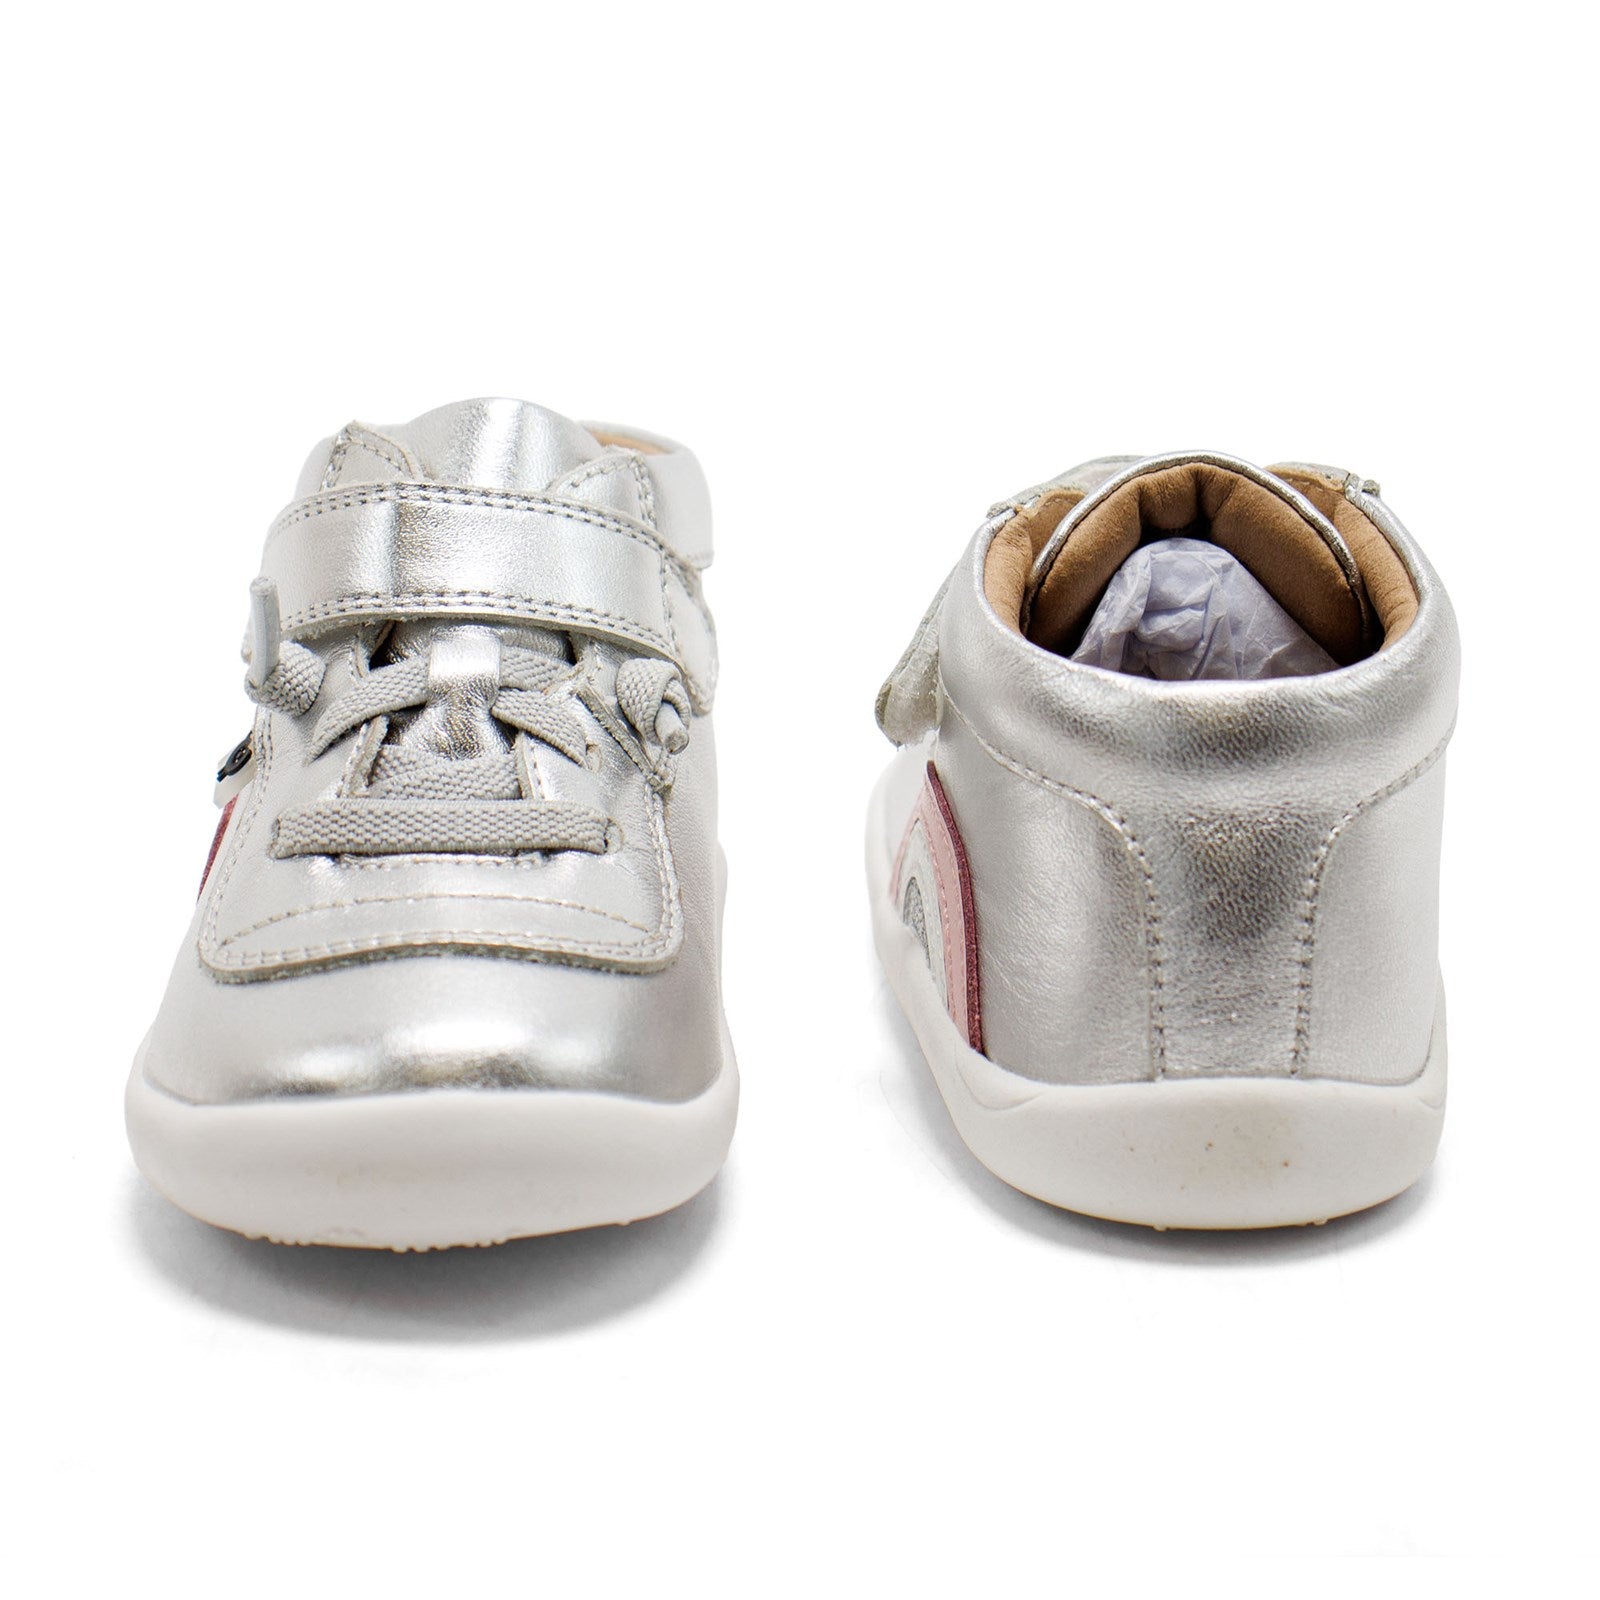 Old Soles Toddler Sun Bright Leather Sneakers